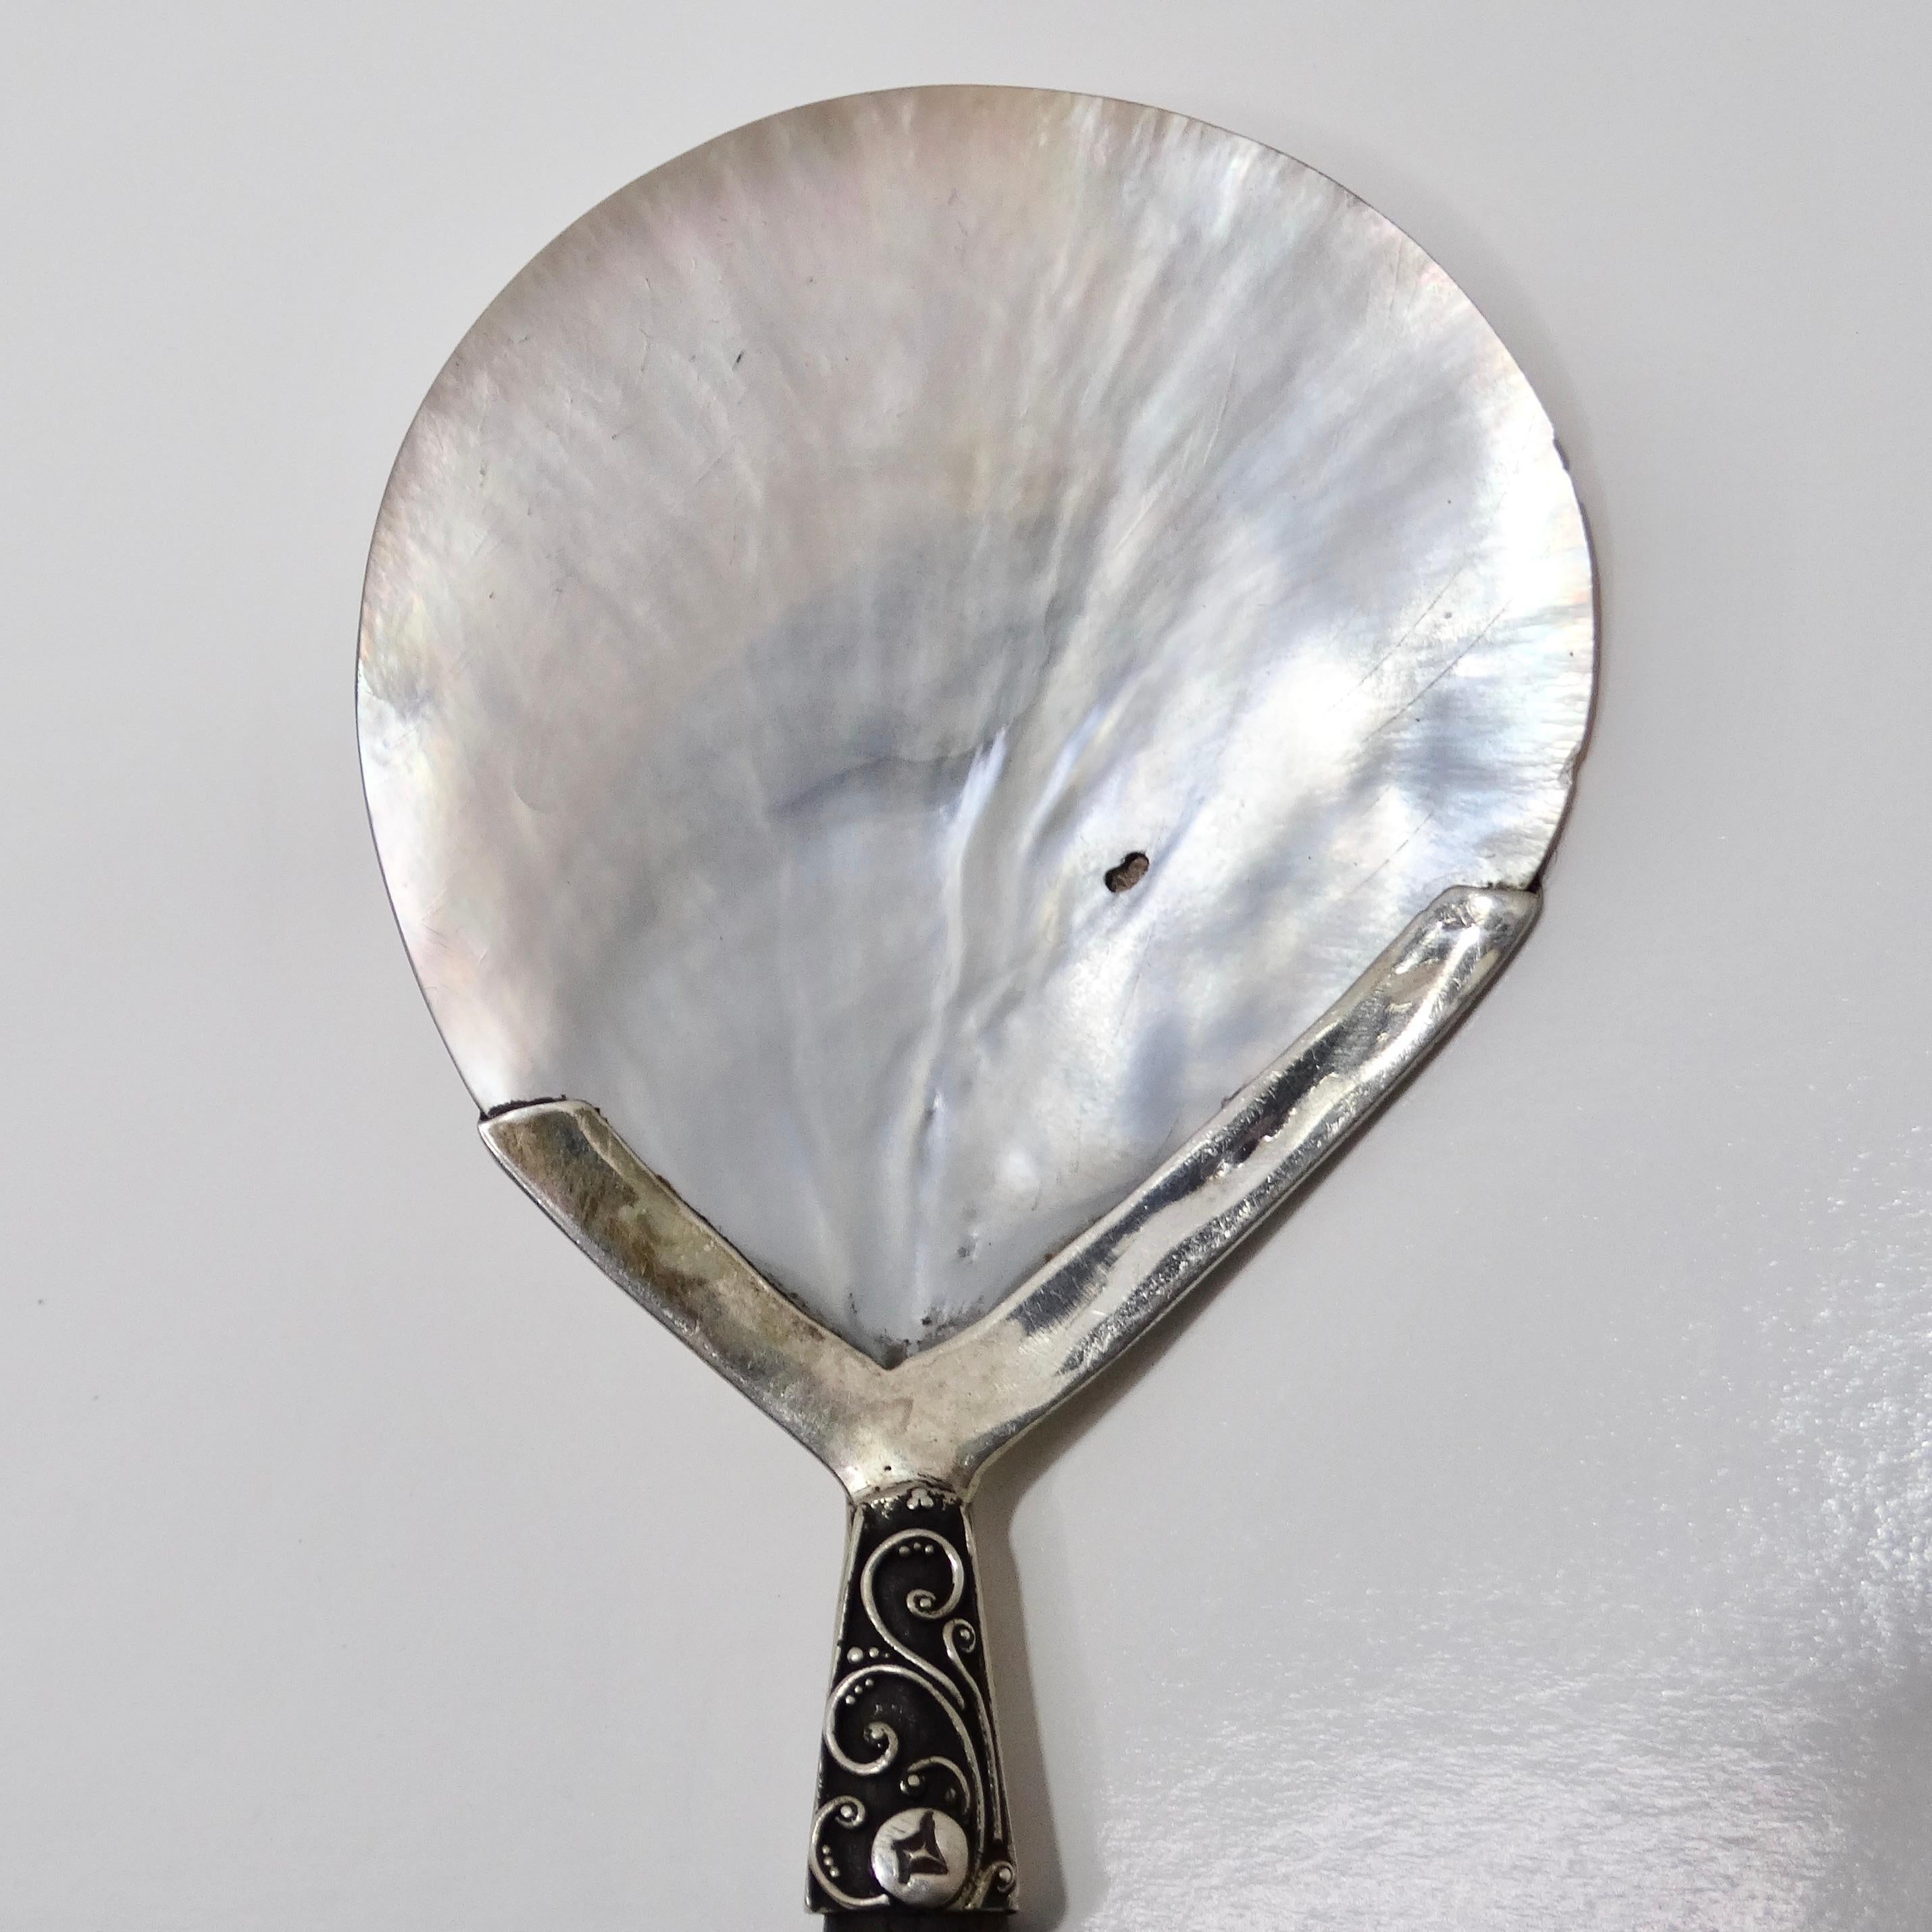 Introducing the Antique Shell Motif Pure Silver Spoon, a truly exceptional piece from the early 1900s that captures the essence of timeless luxury and sophistication.

Crafted with meticulous attention to detail, this exquisite spoon features a